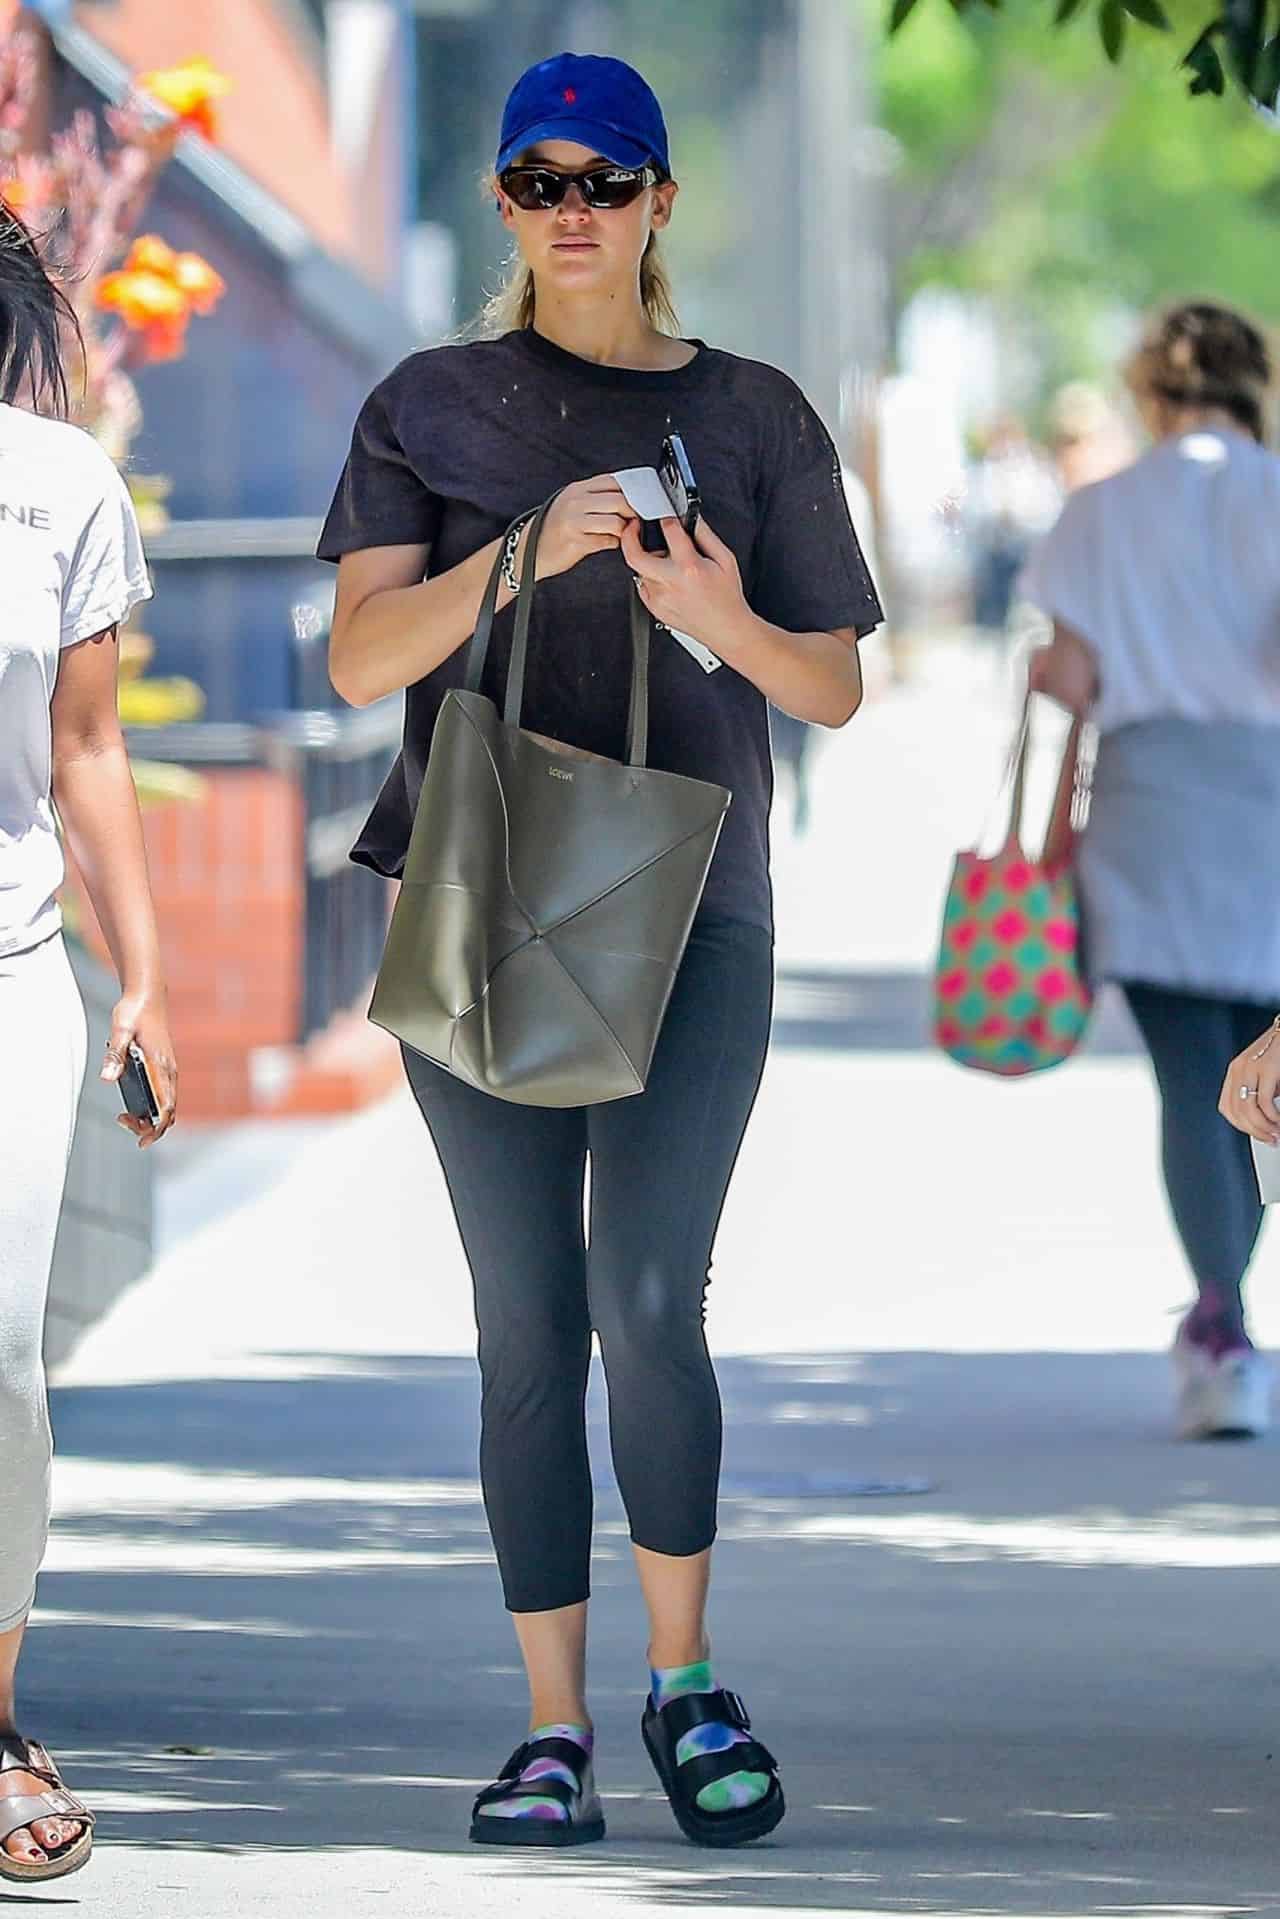 Jennifer Lawrence Heads to Pilates in a Comfy and Chic Outfit